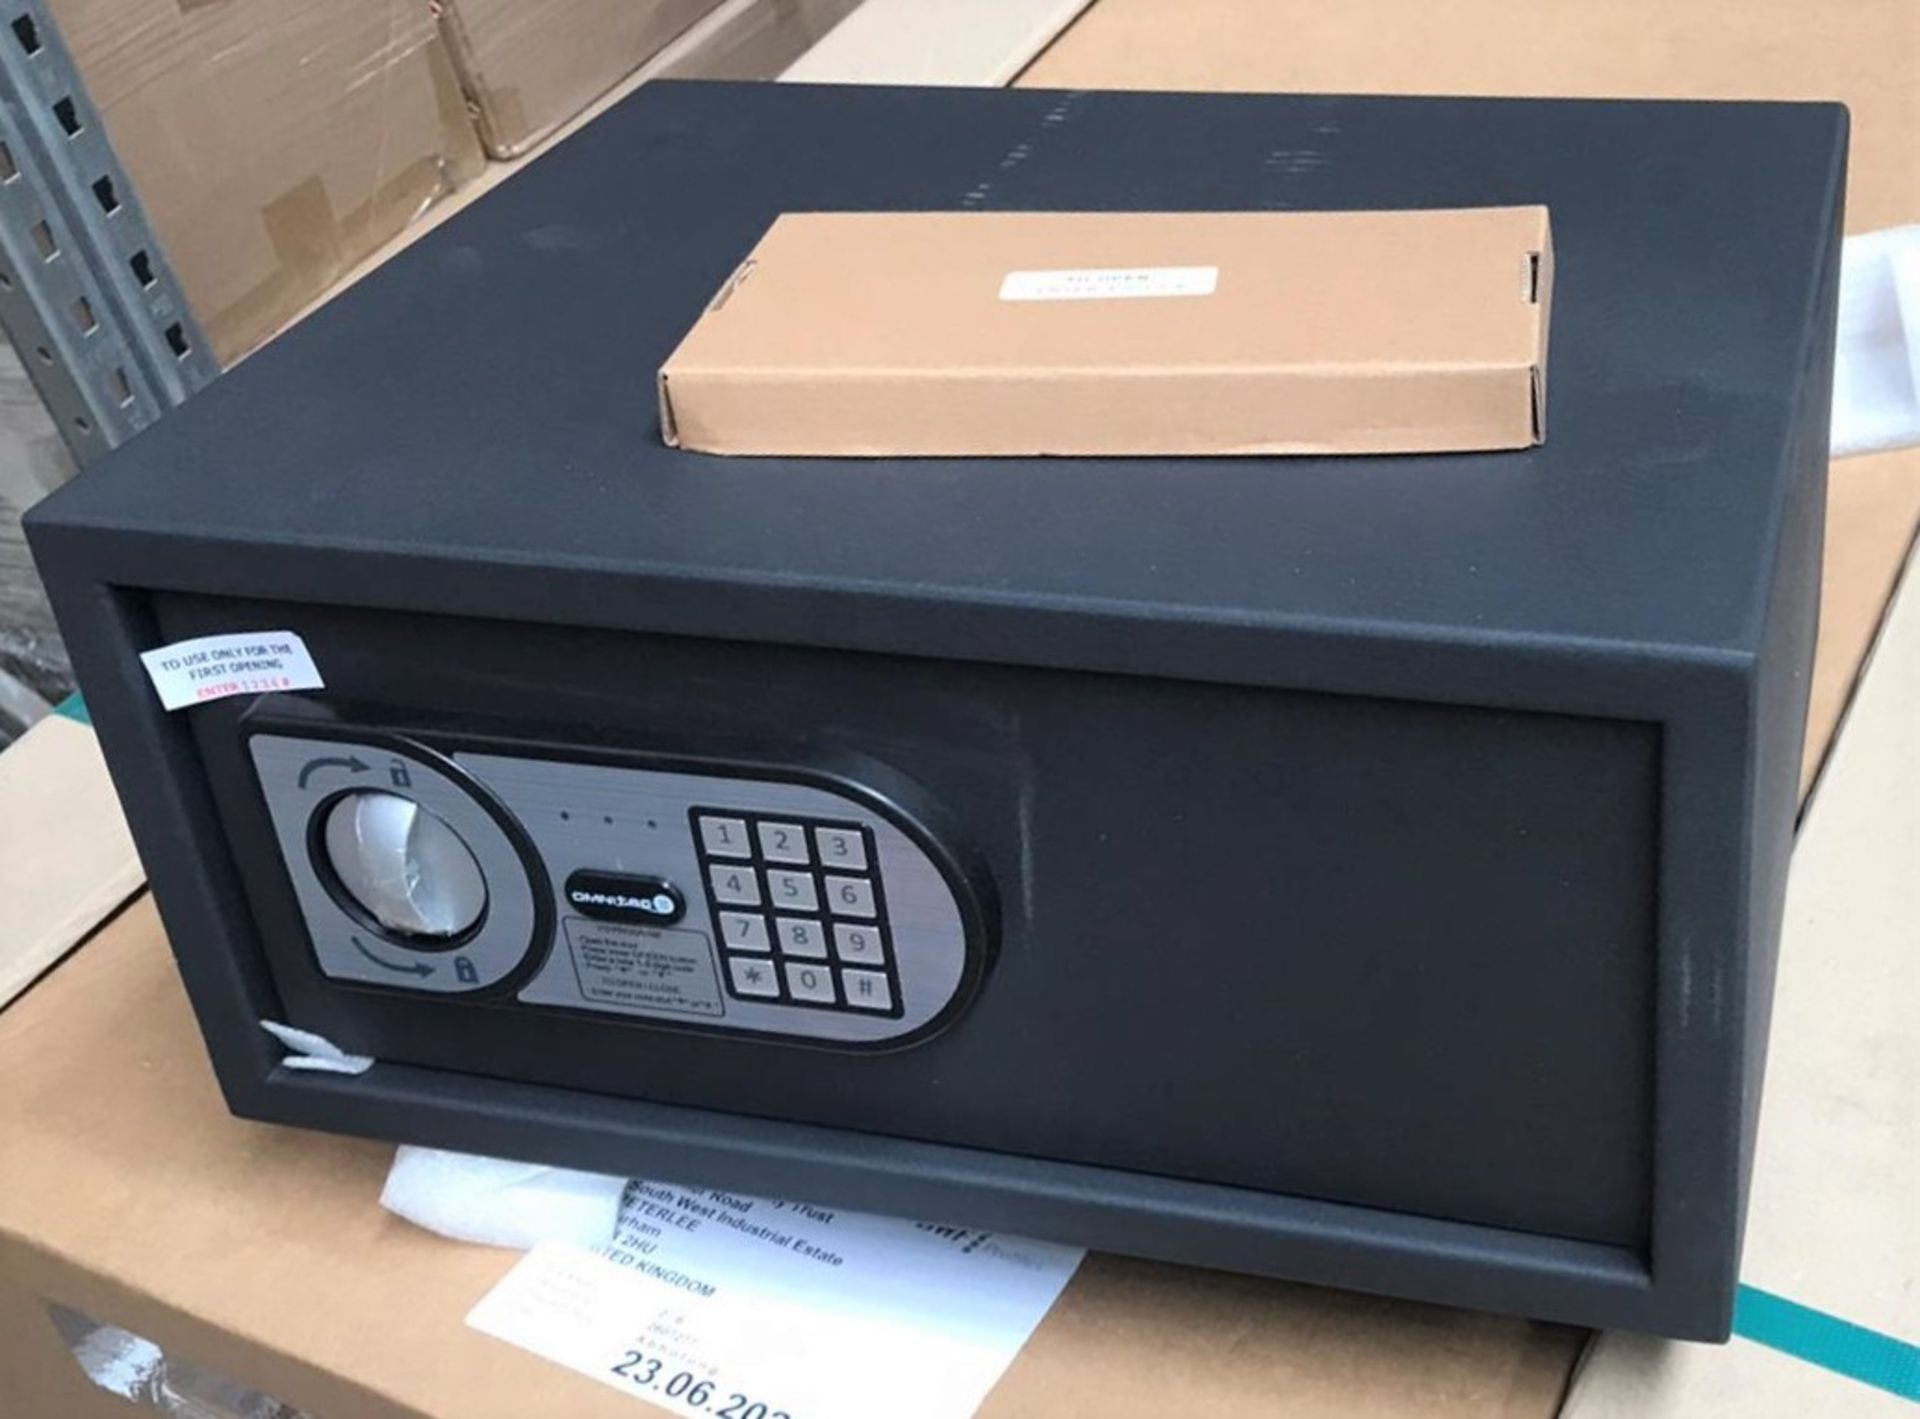 4 x Omnitec Safeguard Security Safes With Keypad Opening - Model Laptop 15 - Size H20 x W43 x D35 - Image 4 of 7